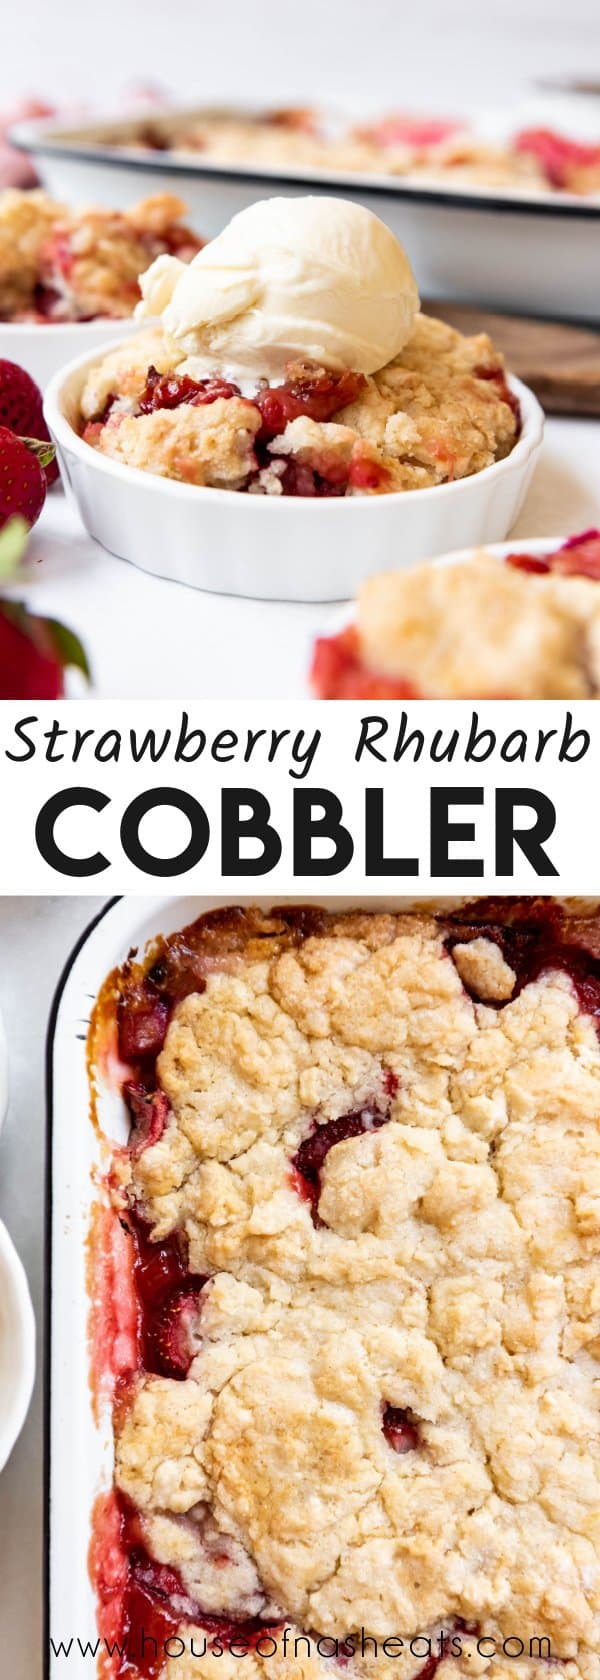 A collage of images of strawberry rhubarb cobbler with text overlay.